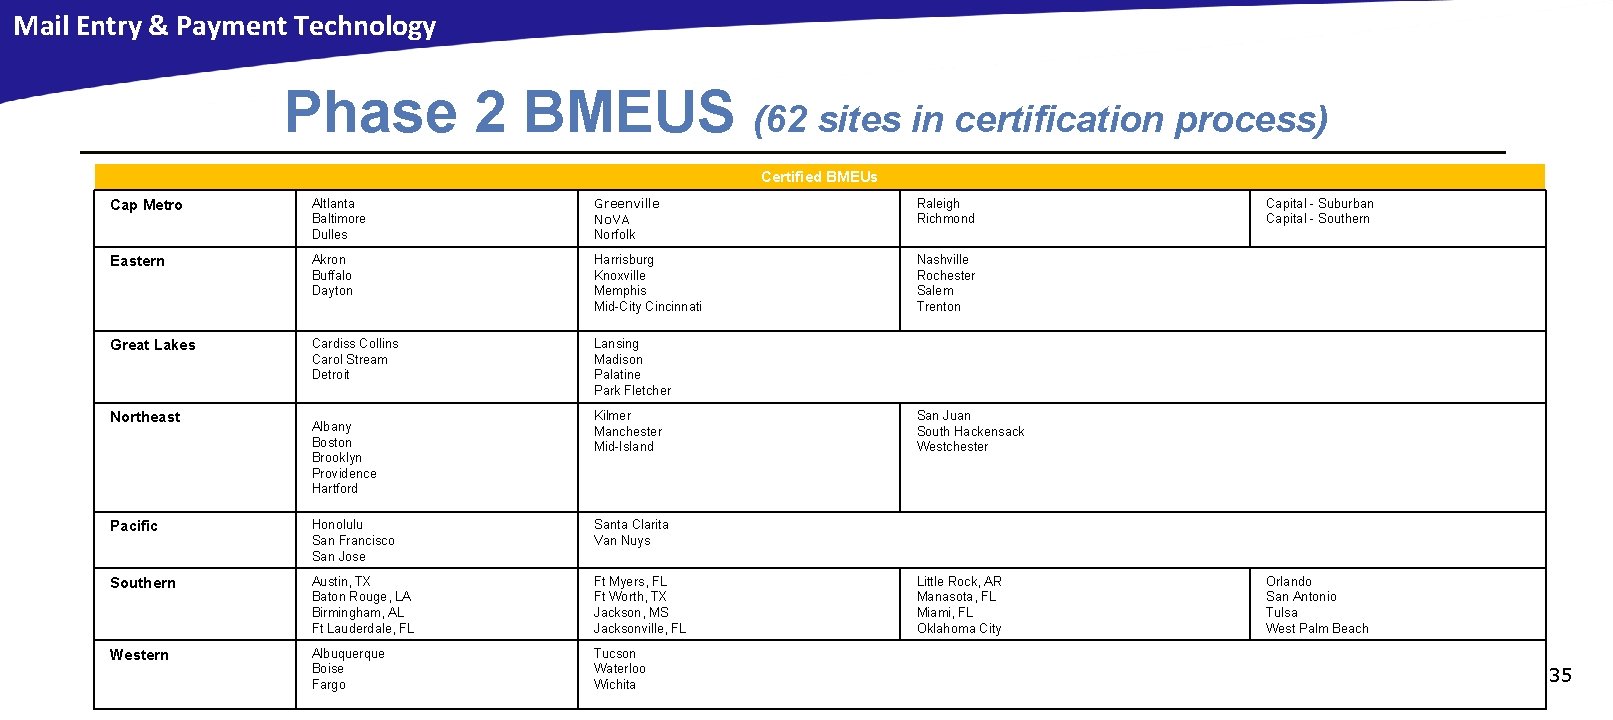 Mail Entry & Payment Technology Phase 2 BMEUS (62 sites in certification process) Certified